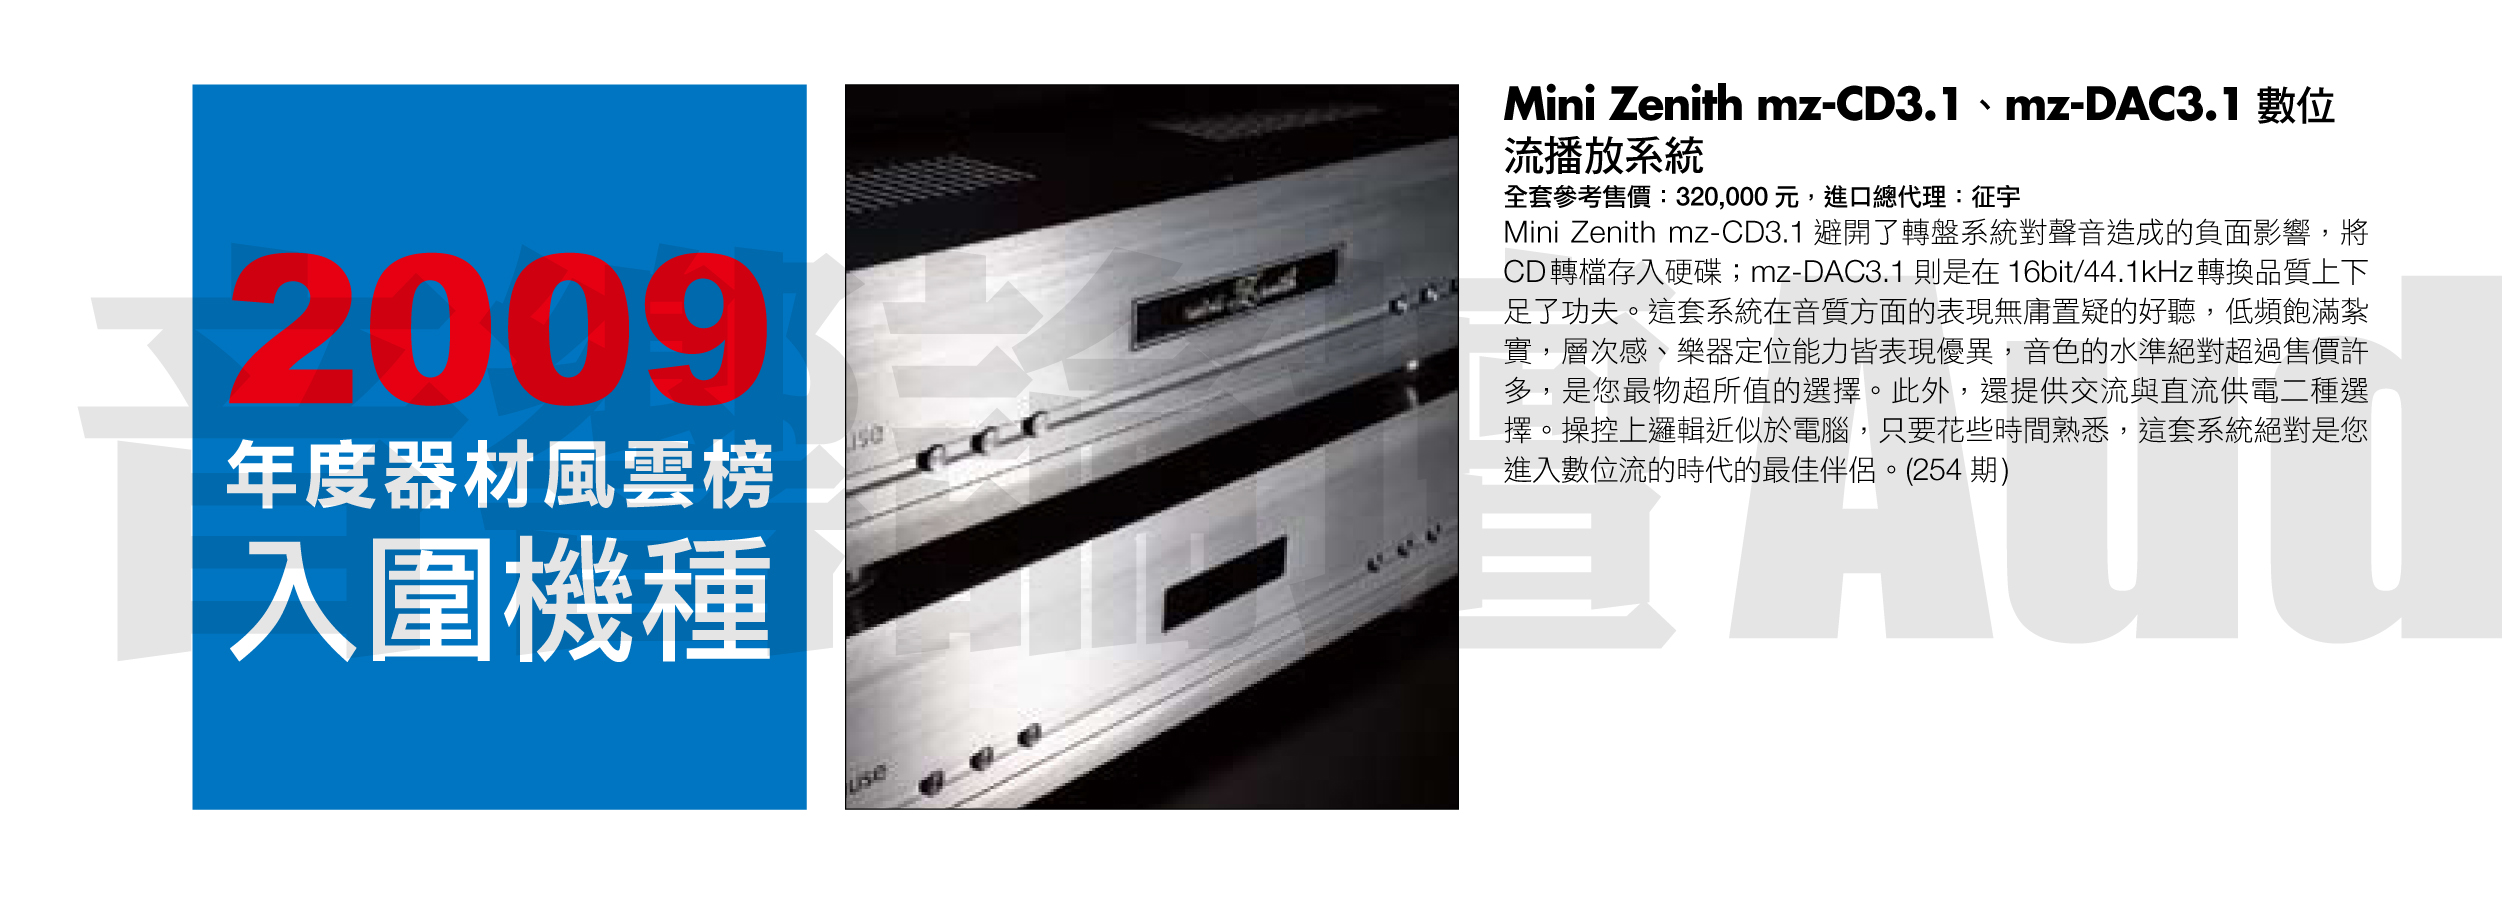 High-end CD and DAC 2010 from mini-Zenith High-End Audio Design & Manufacture